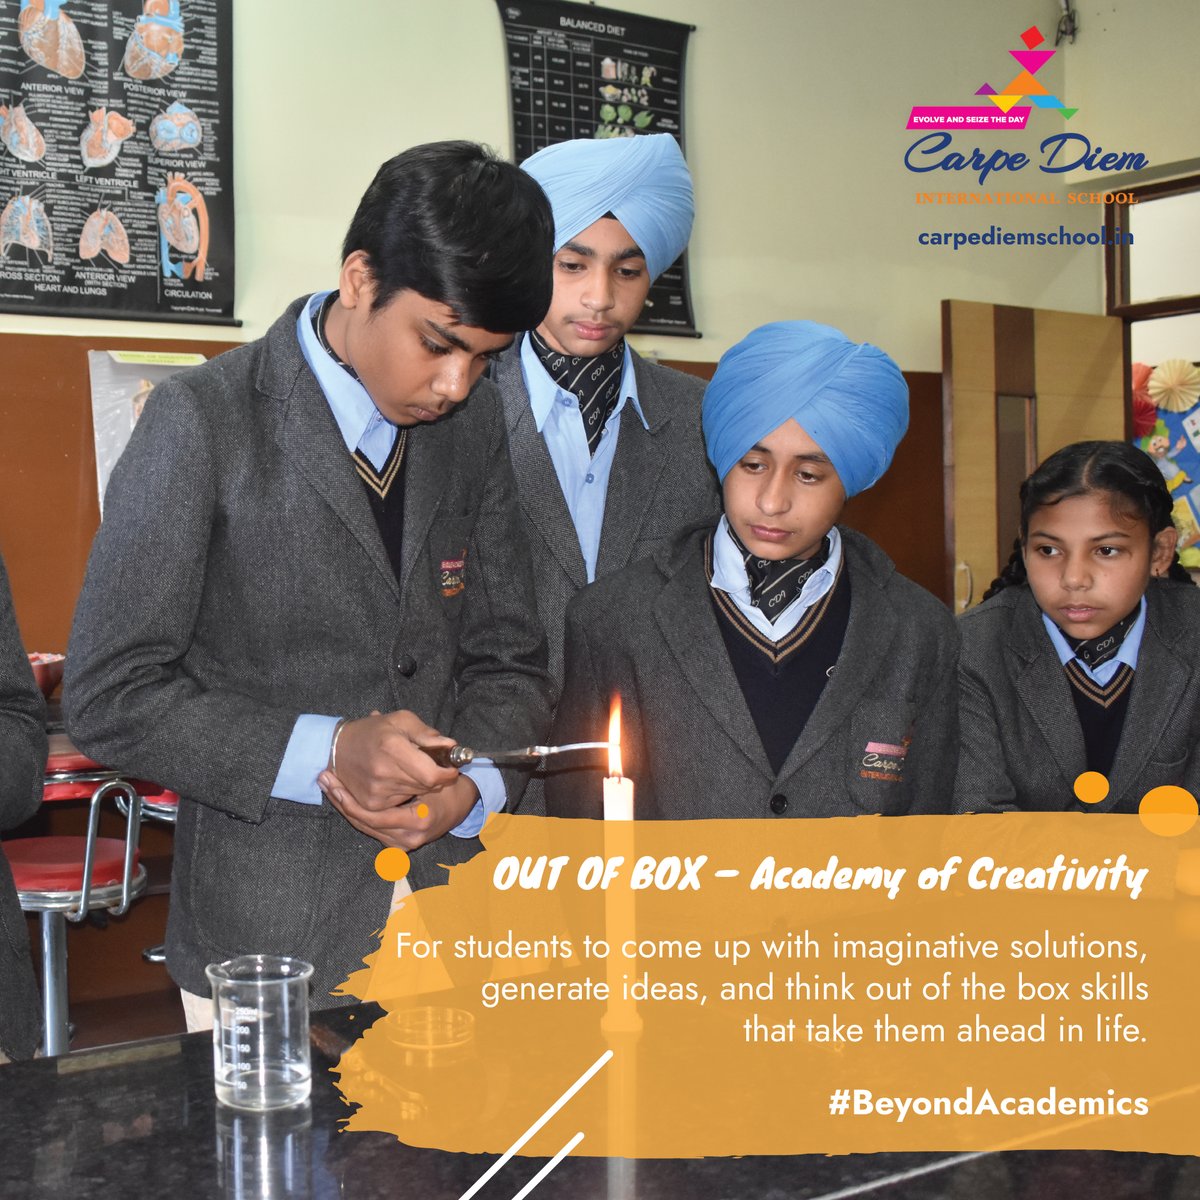 We empower our students to generate imaginative solutions, think outside the box and develop skills that will take them beyond academics🎓

#BeyondAcademics #CarpeDiemInternationalSchool #CBSESchoolInRajpura #SmartSchool #Education #School #SchoolLife #Learning